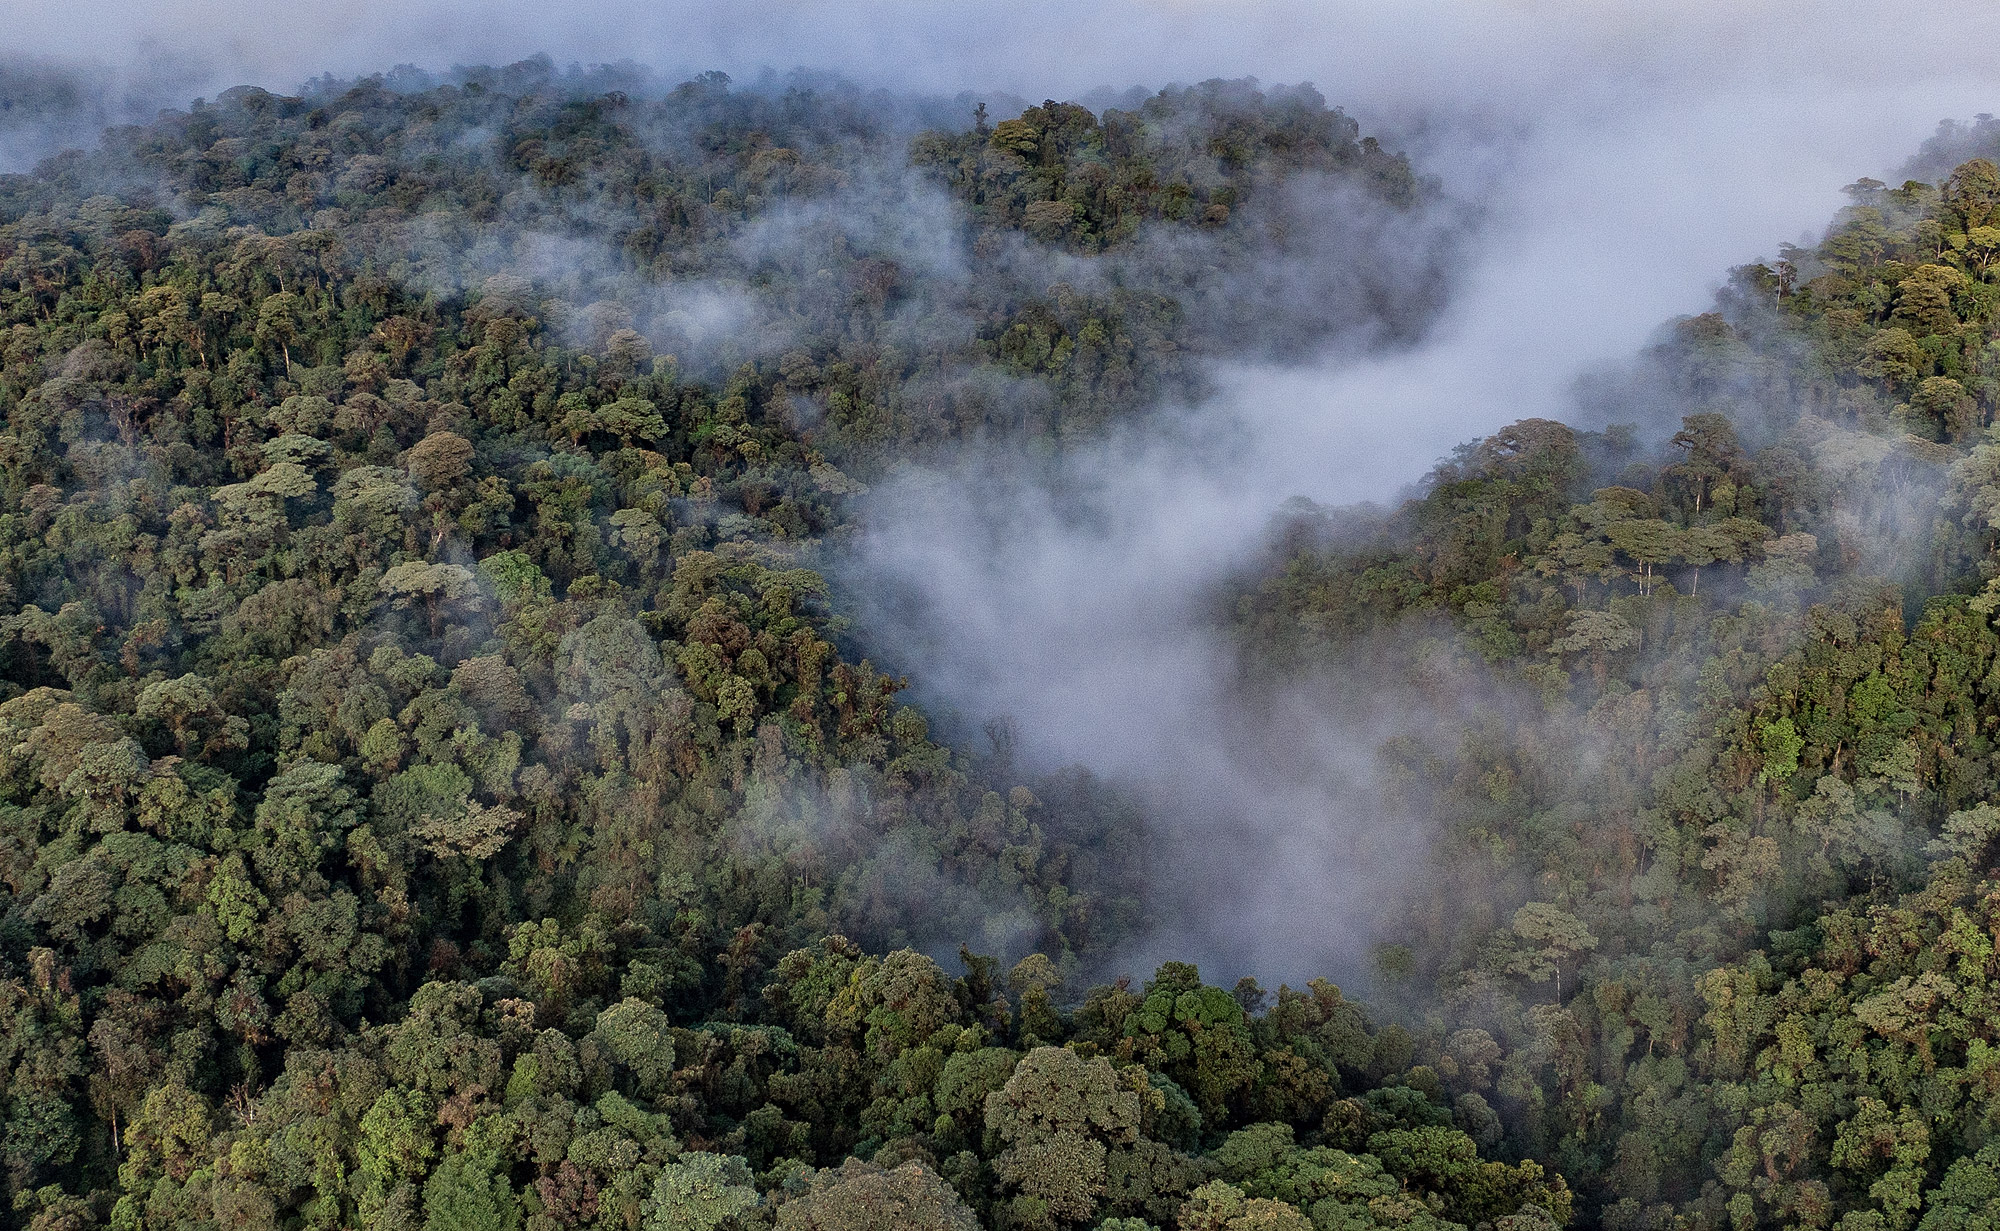 Drone image of the Arlequín Reserve cloud forest